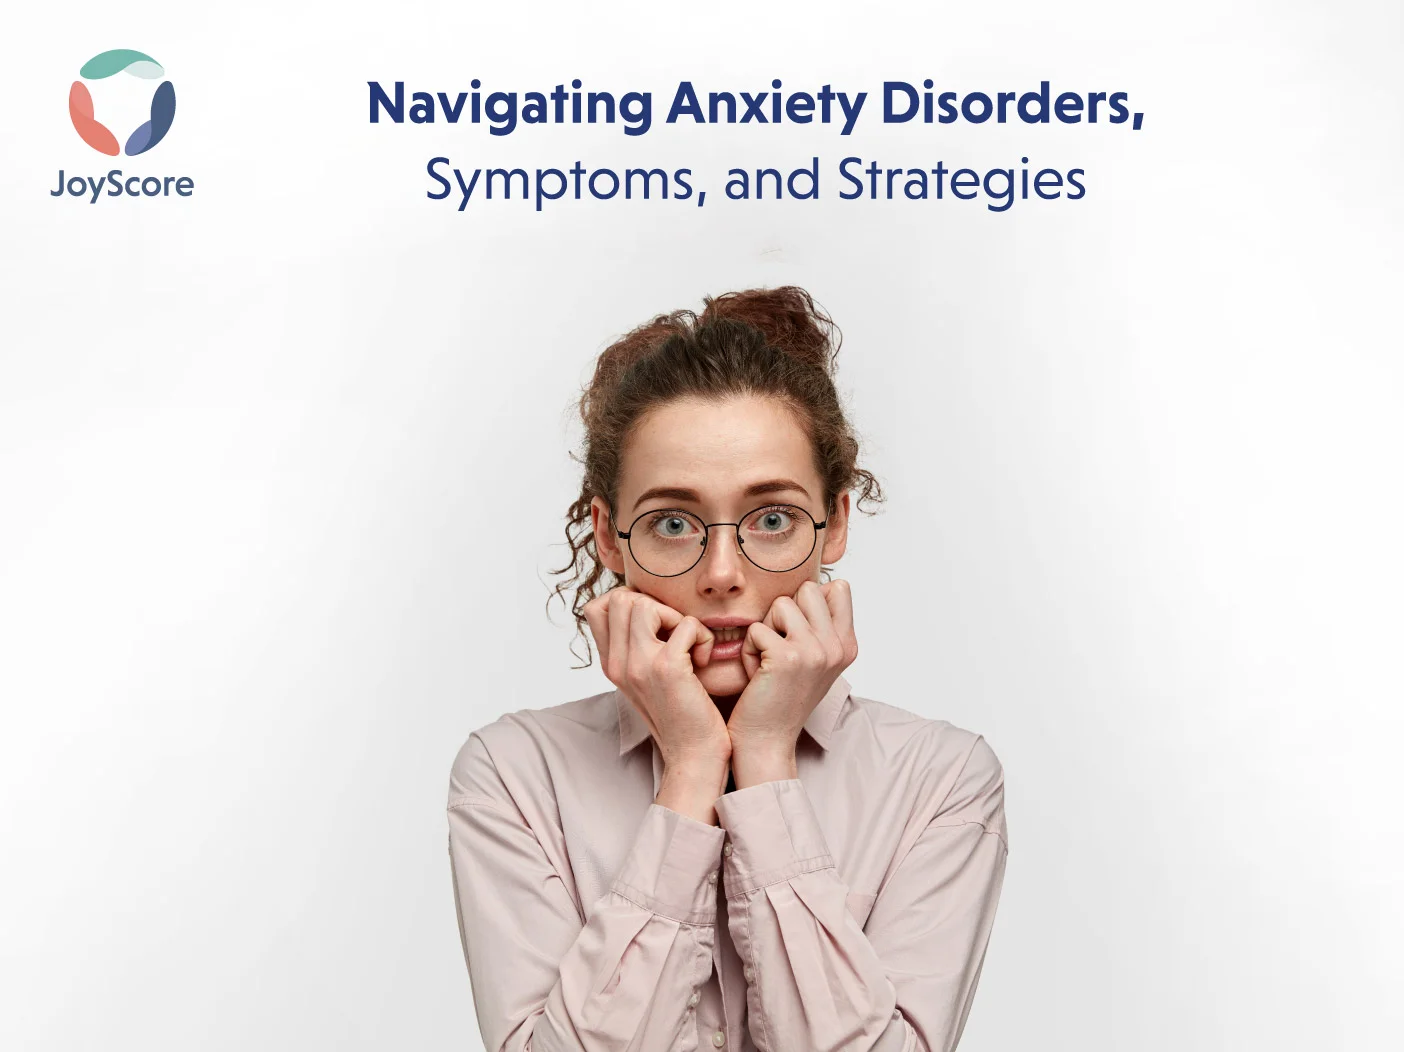 Navigating Anxiety Disorders, Symptoms, And Strategies for Managing Anxiety In Daily Life